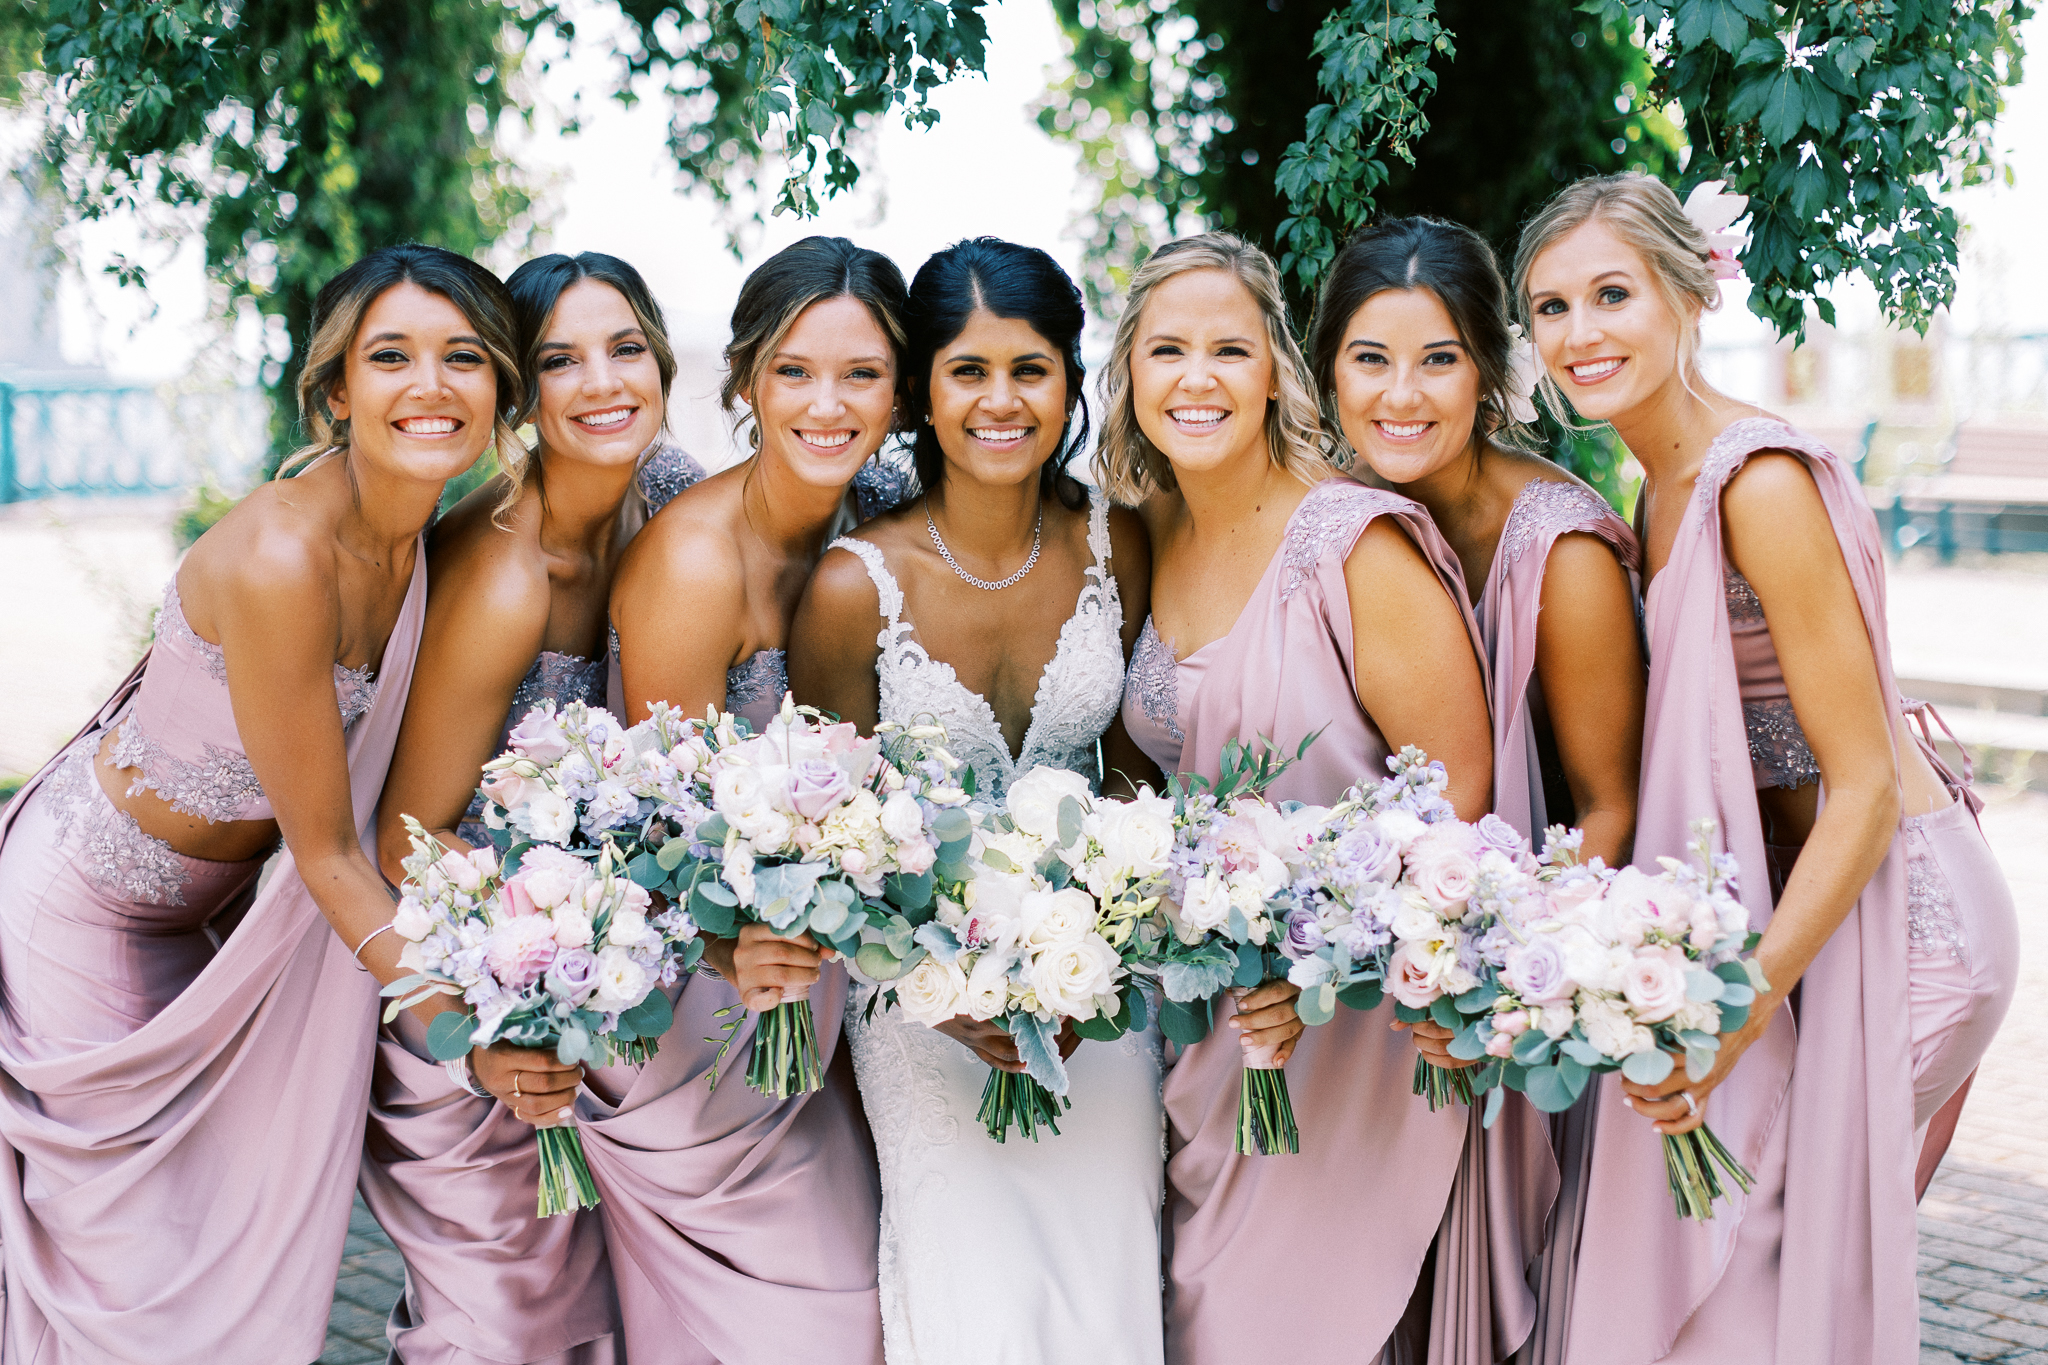 Twin Cities Makeup wedding day services